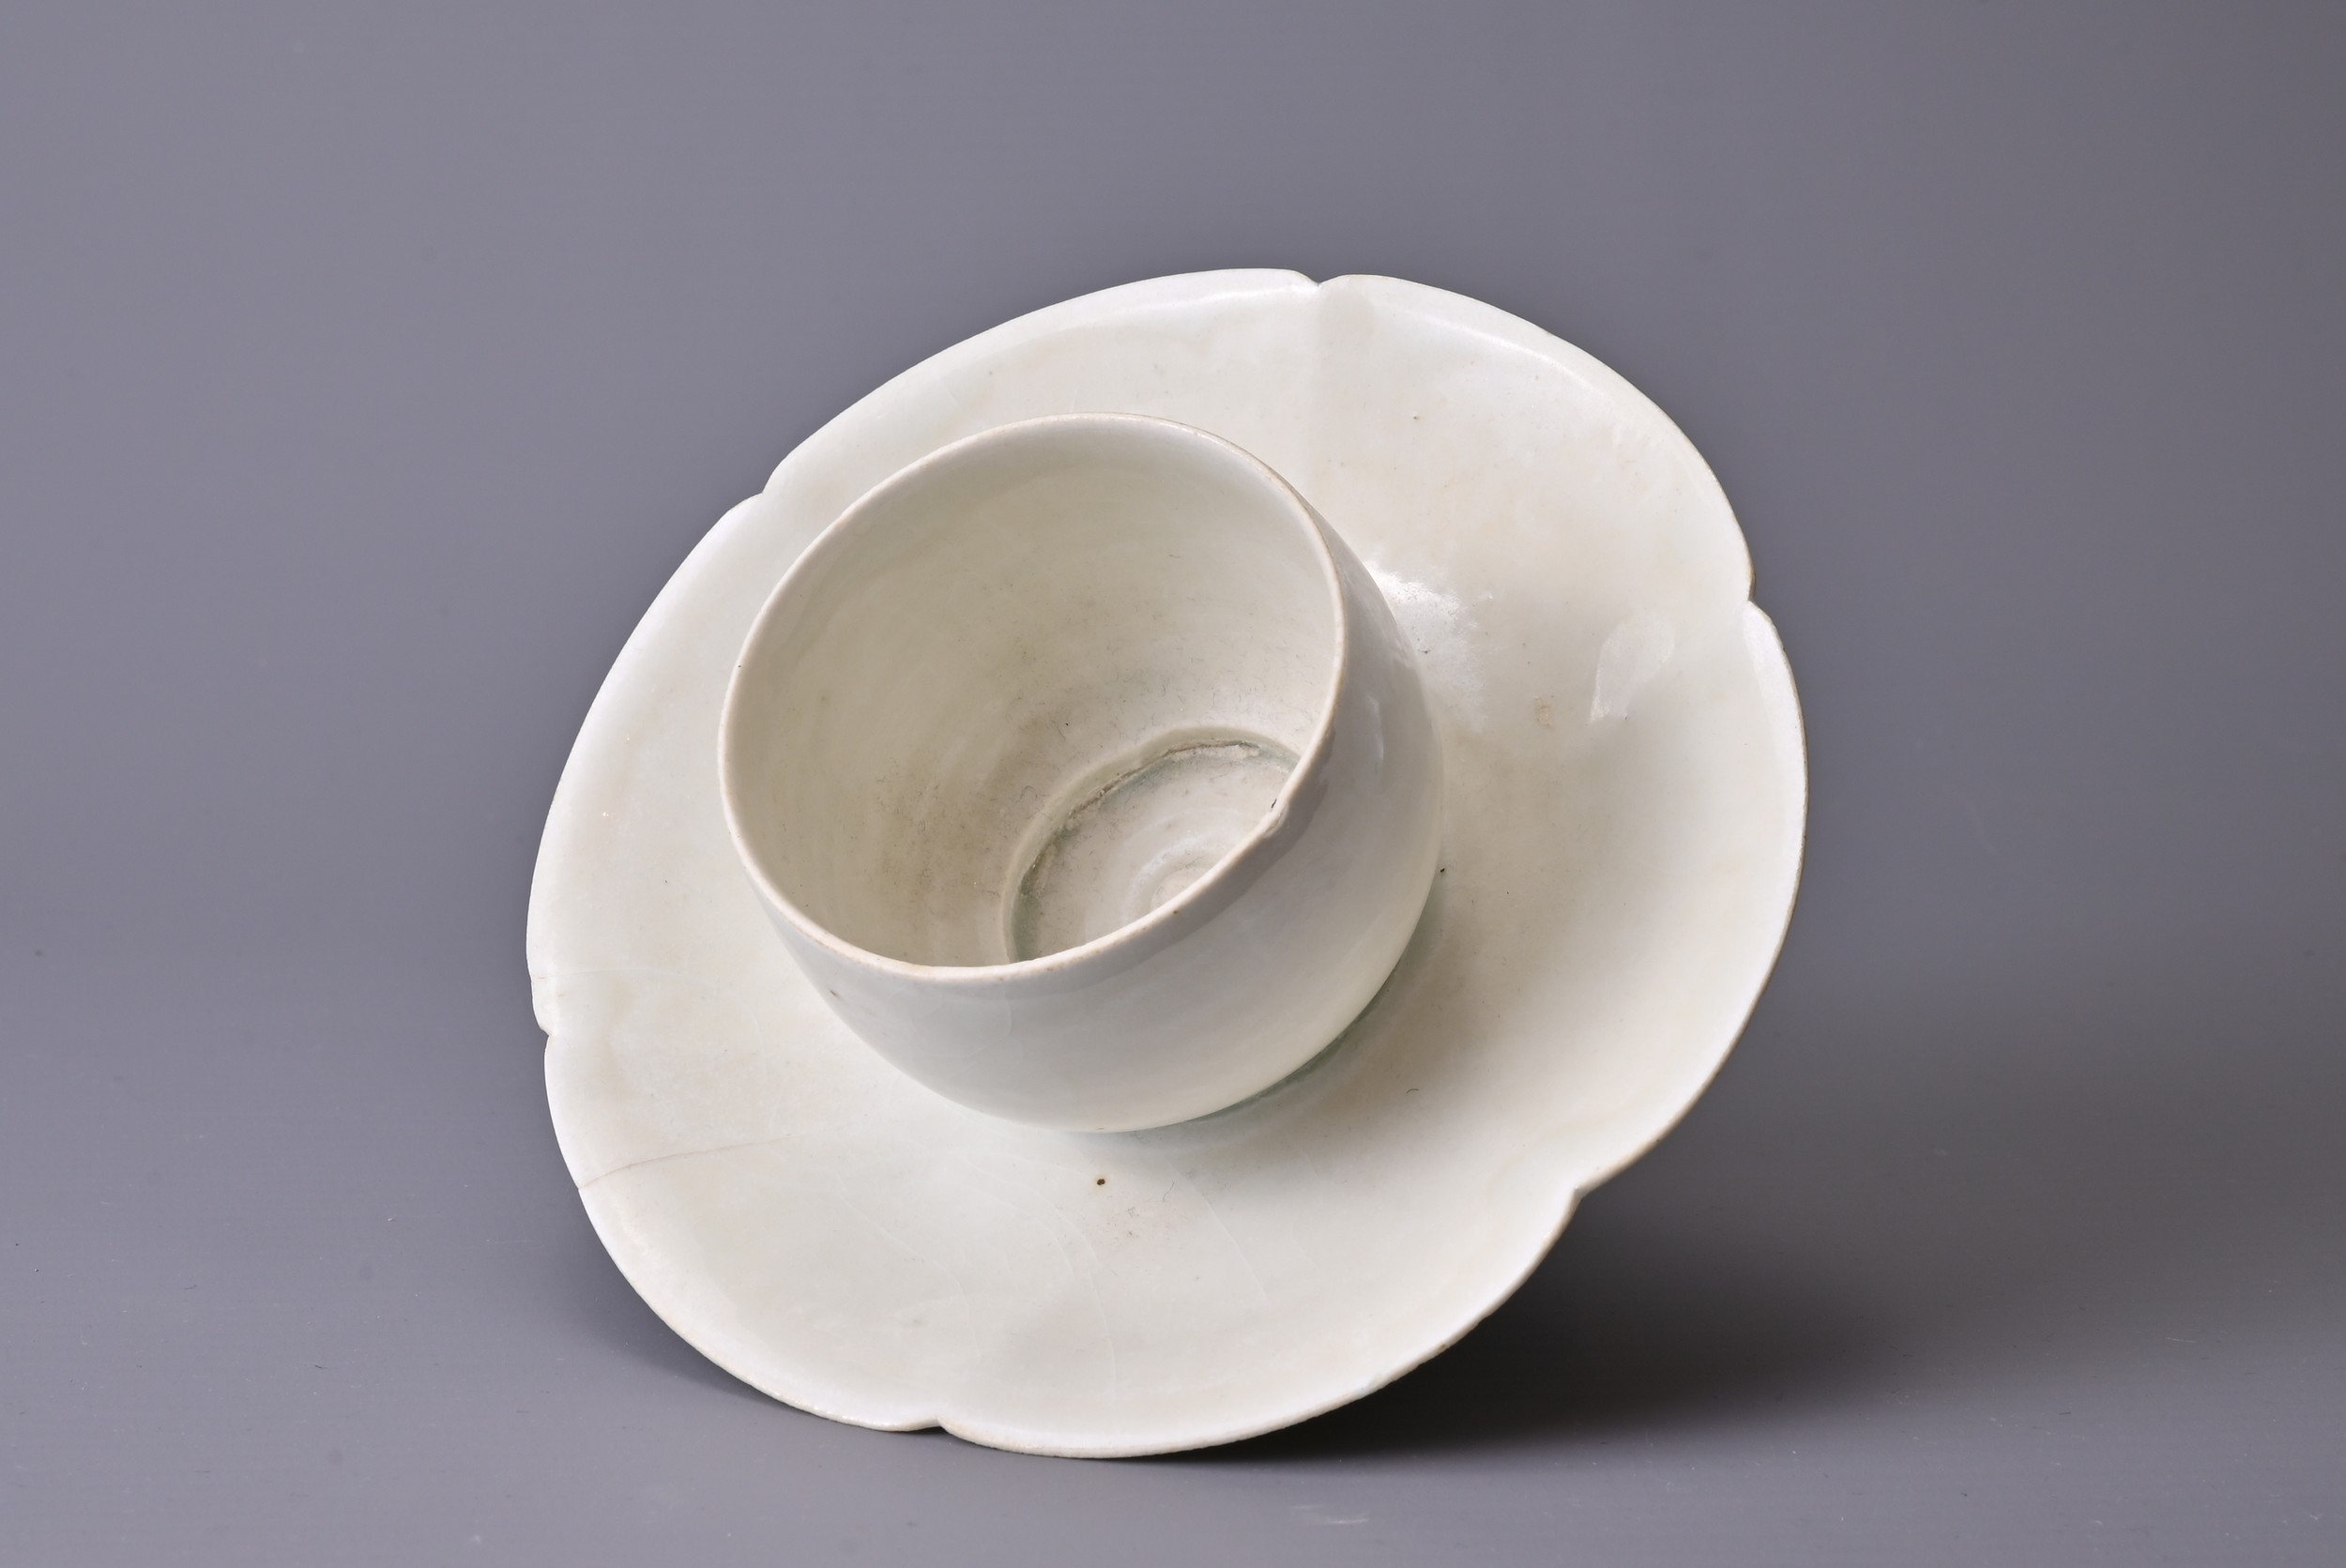 A CHINESE QINGBAI WARE CUP STAND, SONG DYNASTY (960-1279). A rounded cup top section attached to a - Image 5 of 6